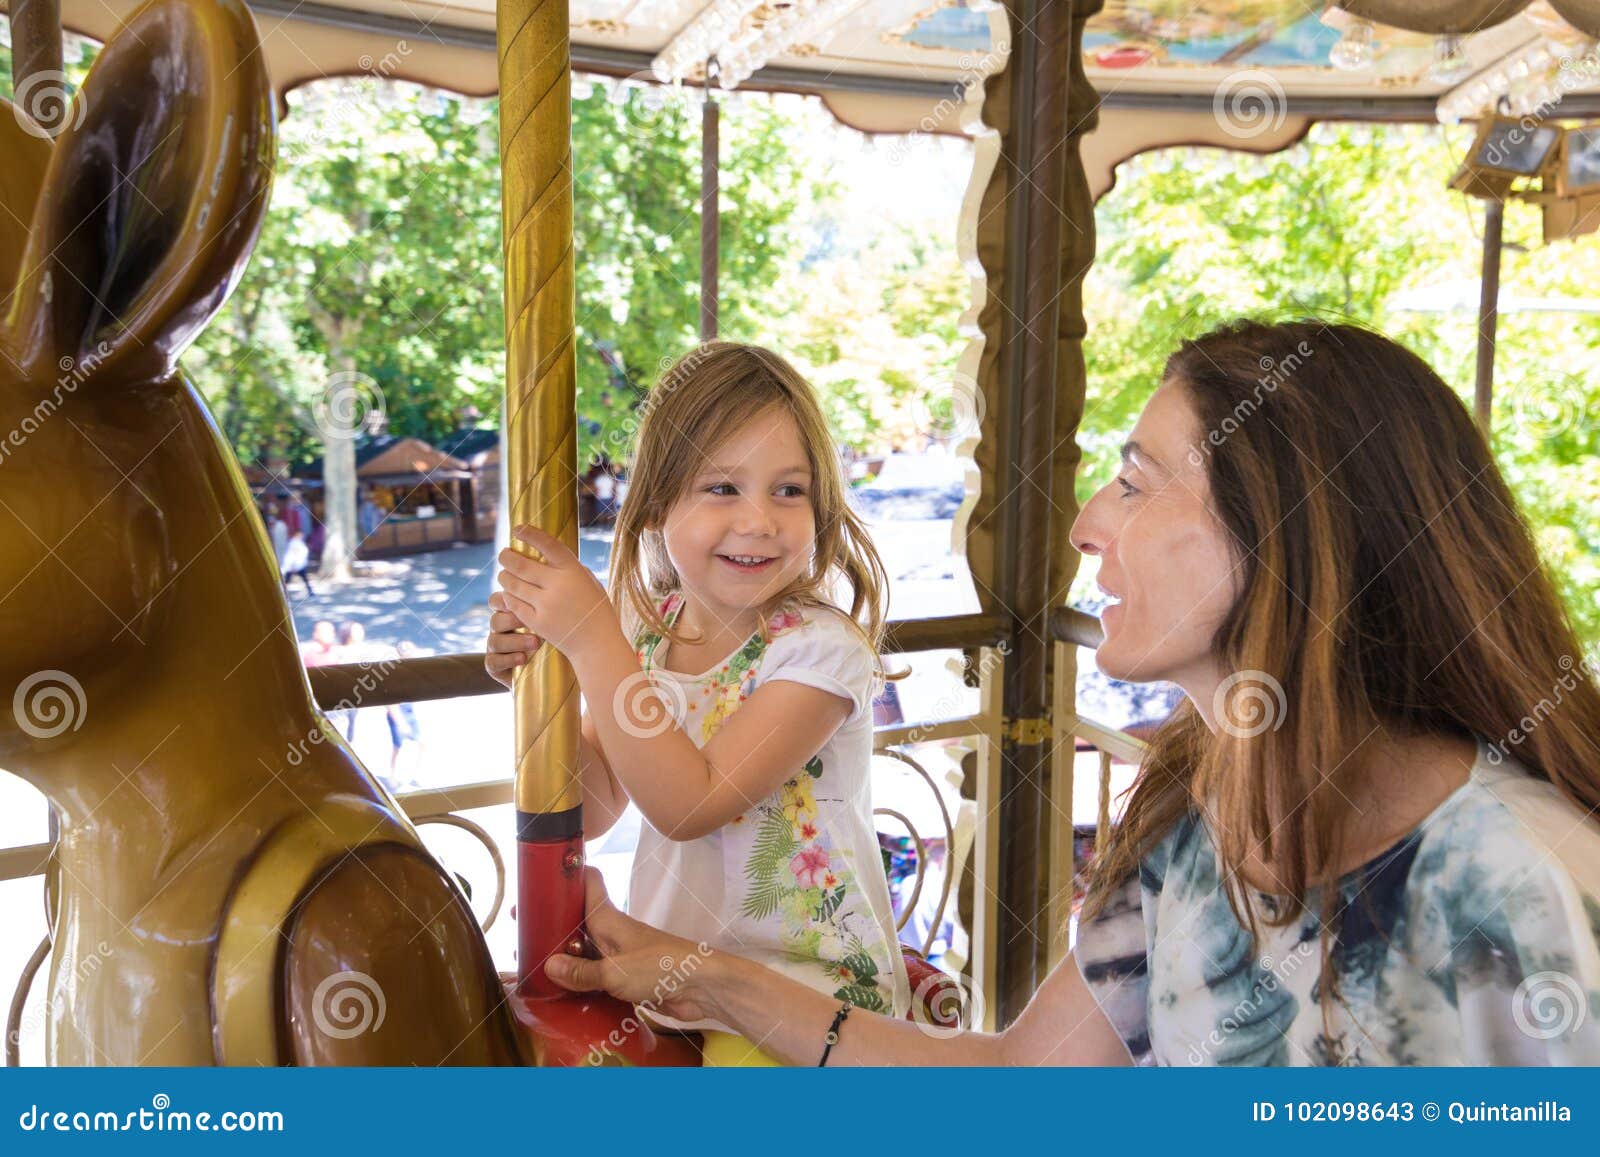 little girl in carousel smiling and looking at mother